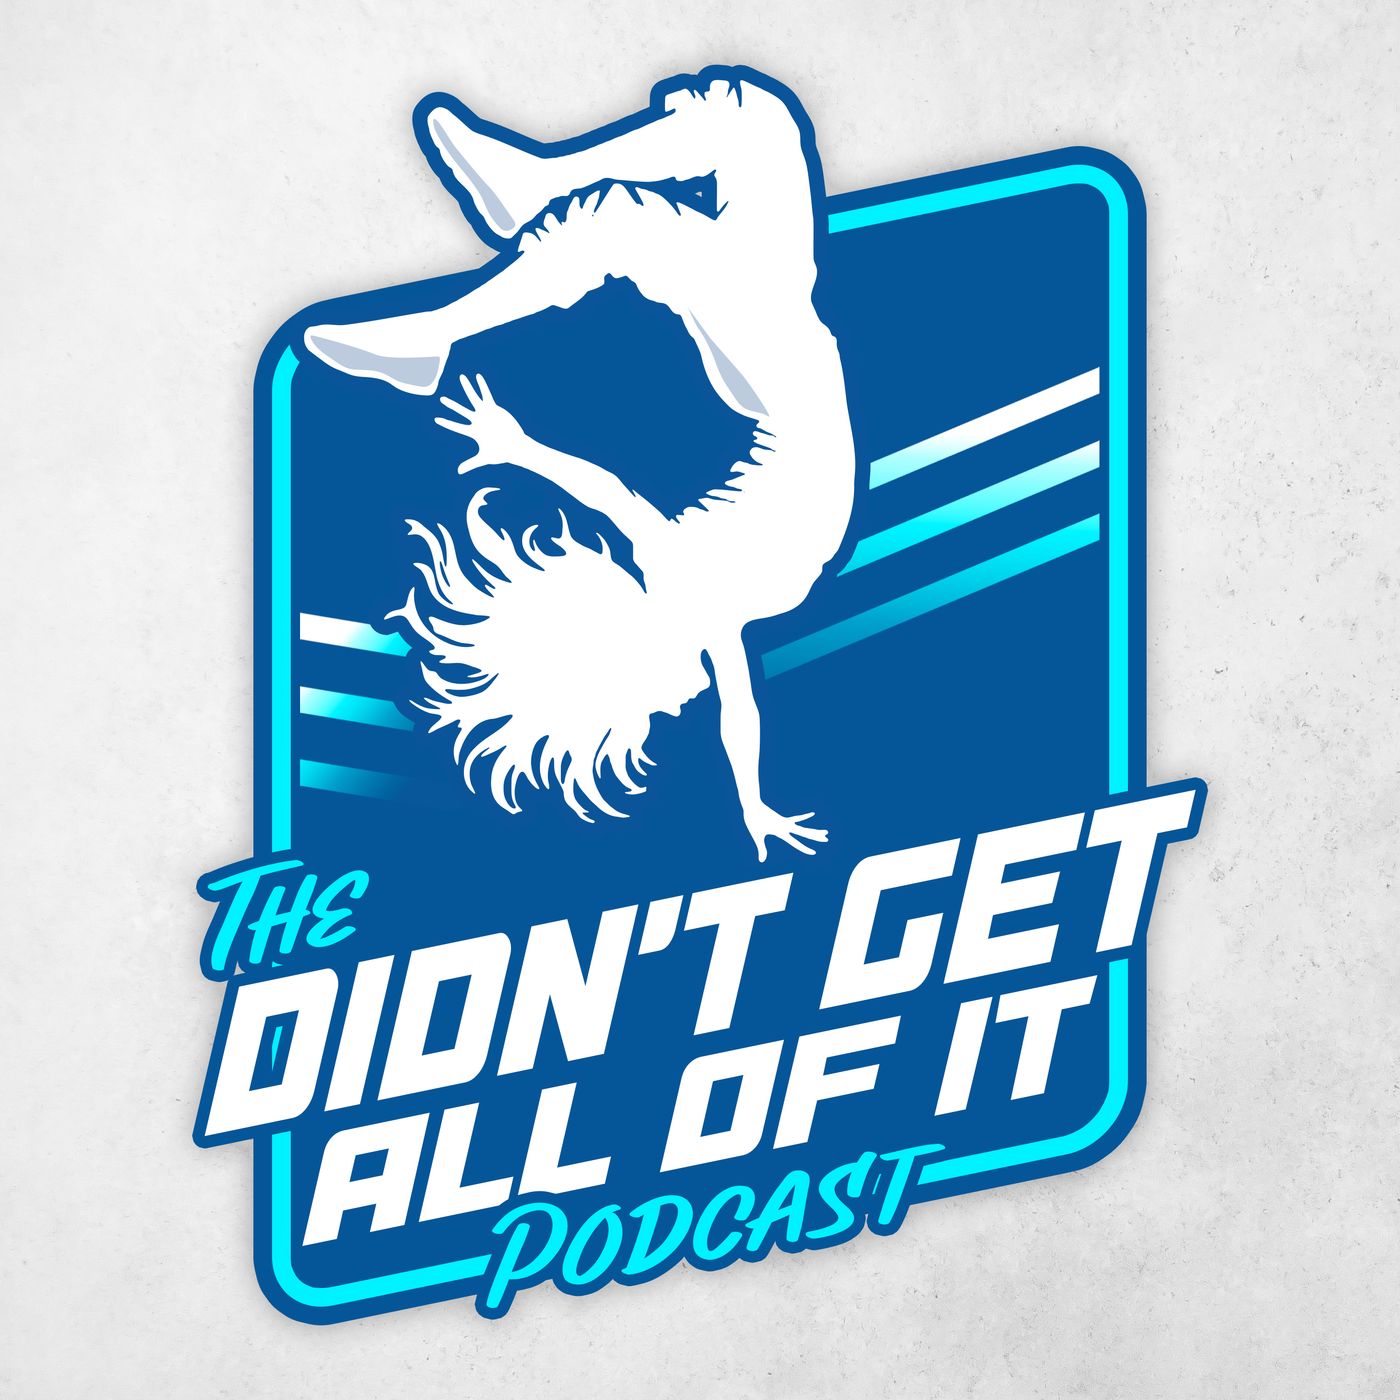 Introducing The Fatal Four's Didn't Get All Of It Podcast